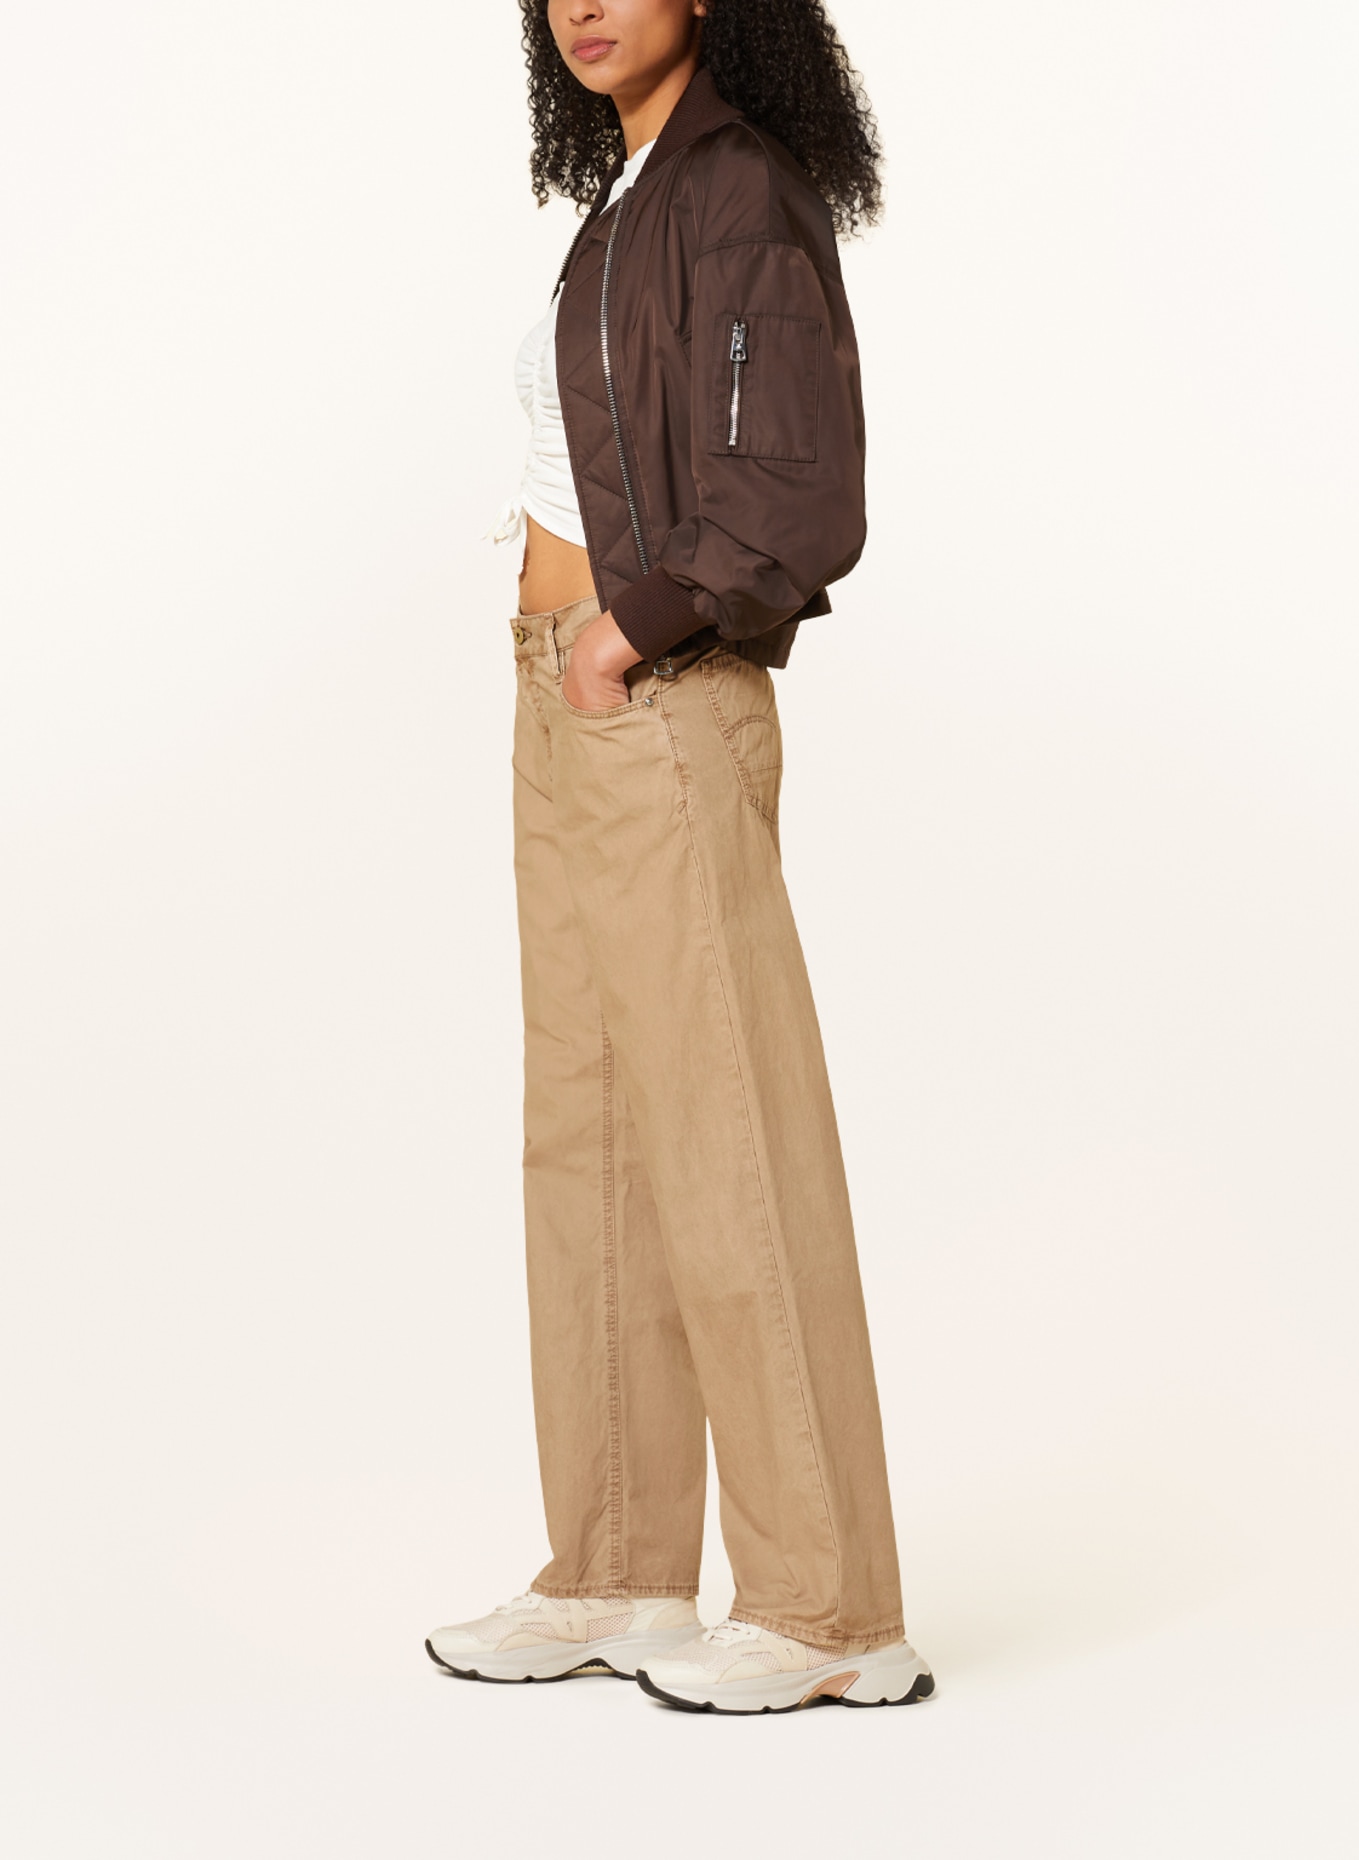 G-Star RAW Trousers JUDEE, Color: C636 dk toggee gd (Image 4)